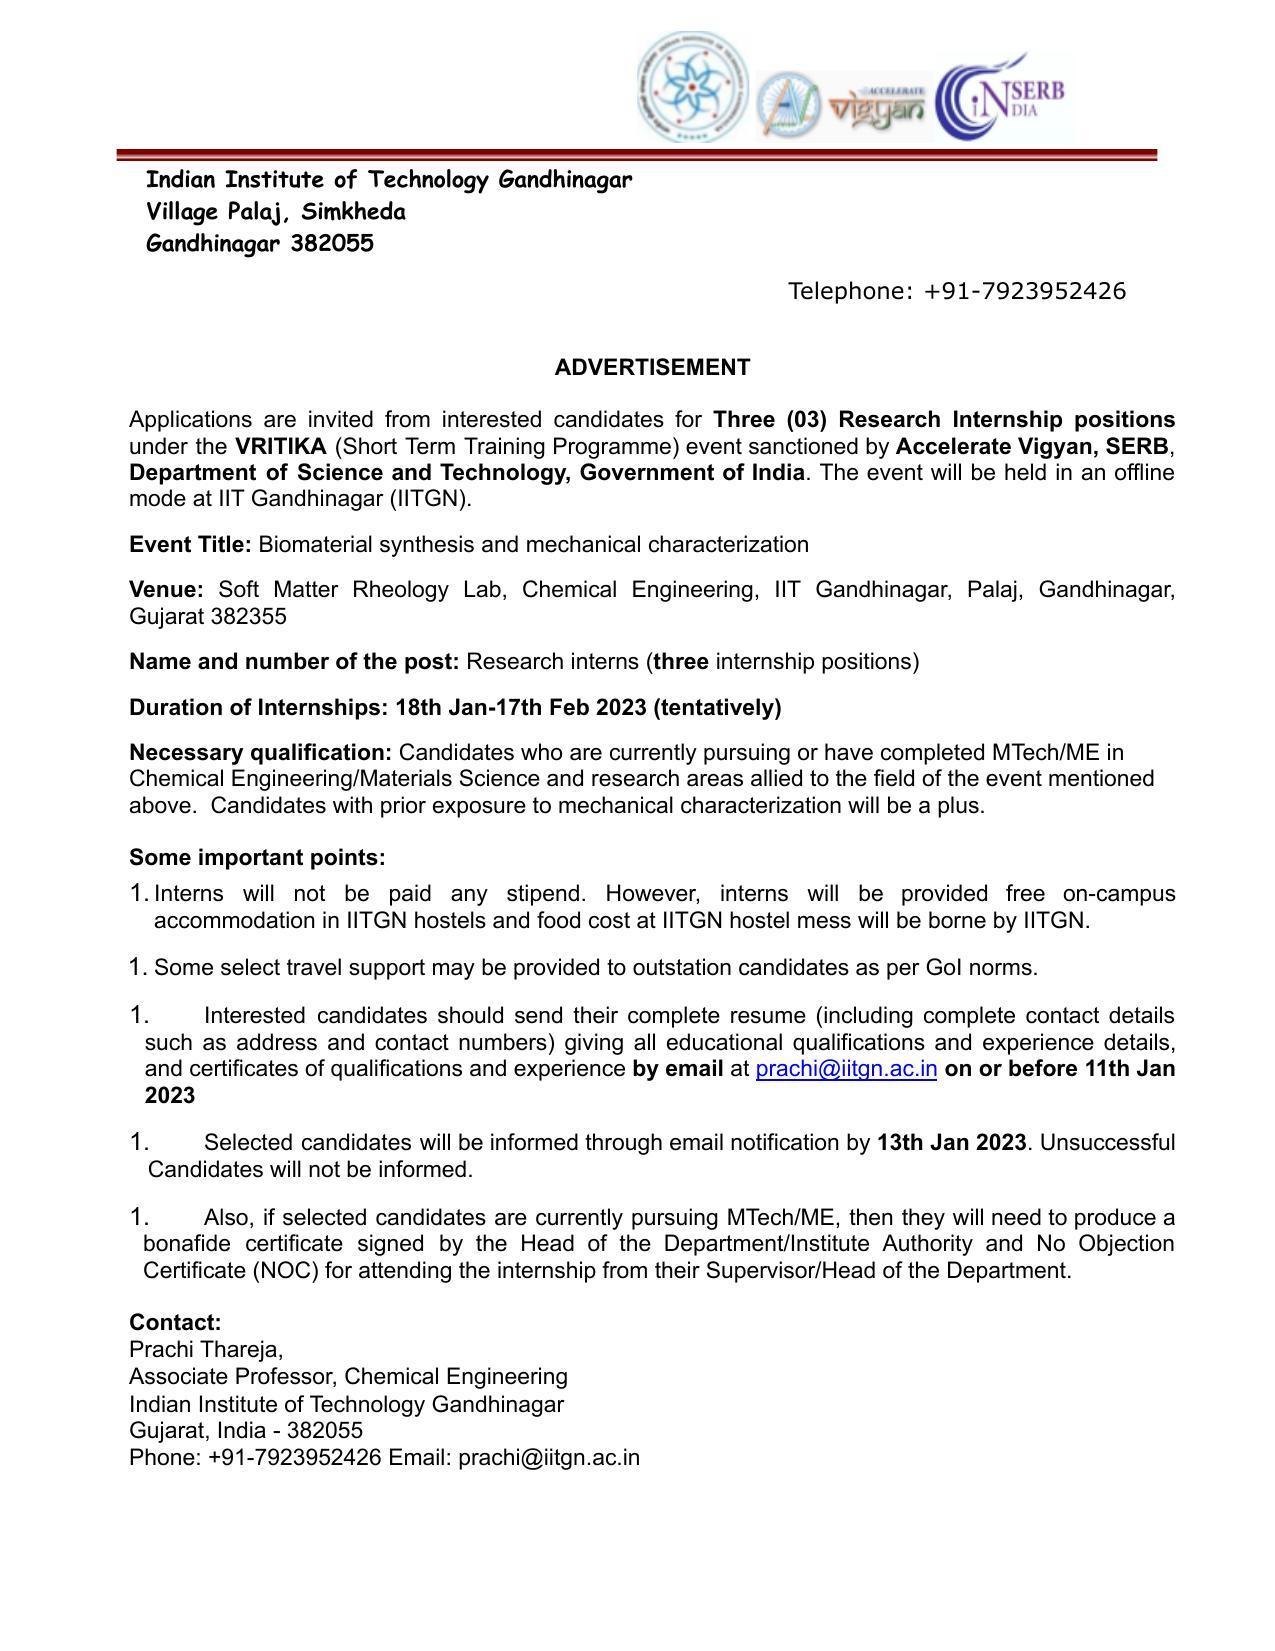 Indian Institute of Technology Gandhinagar Invites Application for Research Internship Recruitment 2023 - Page 1